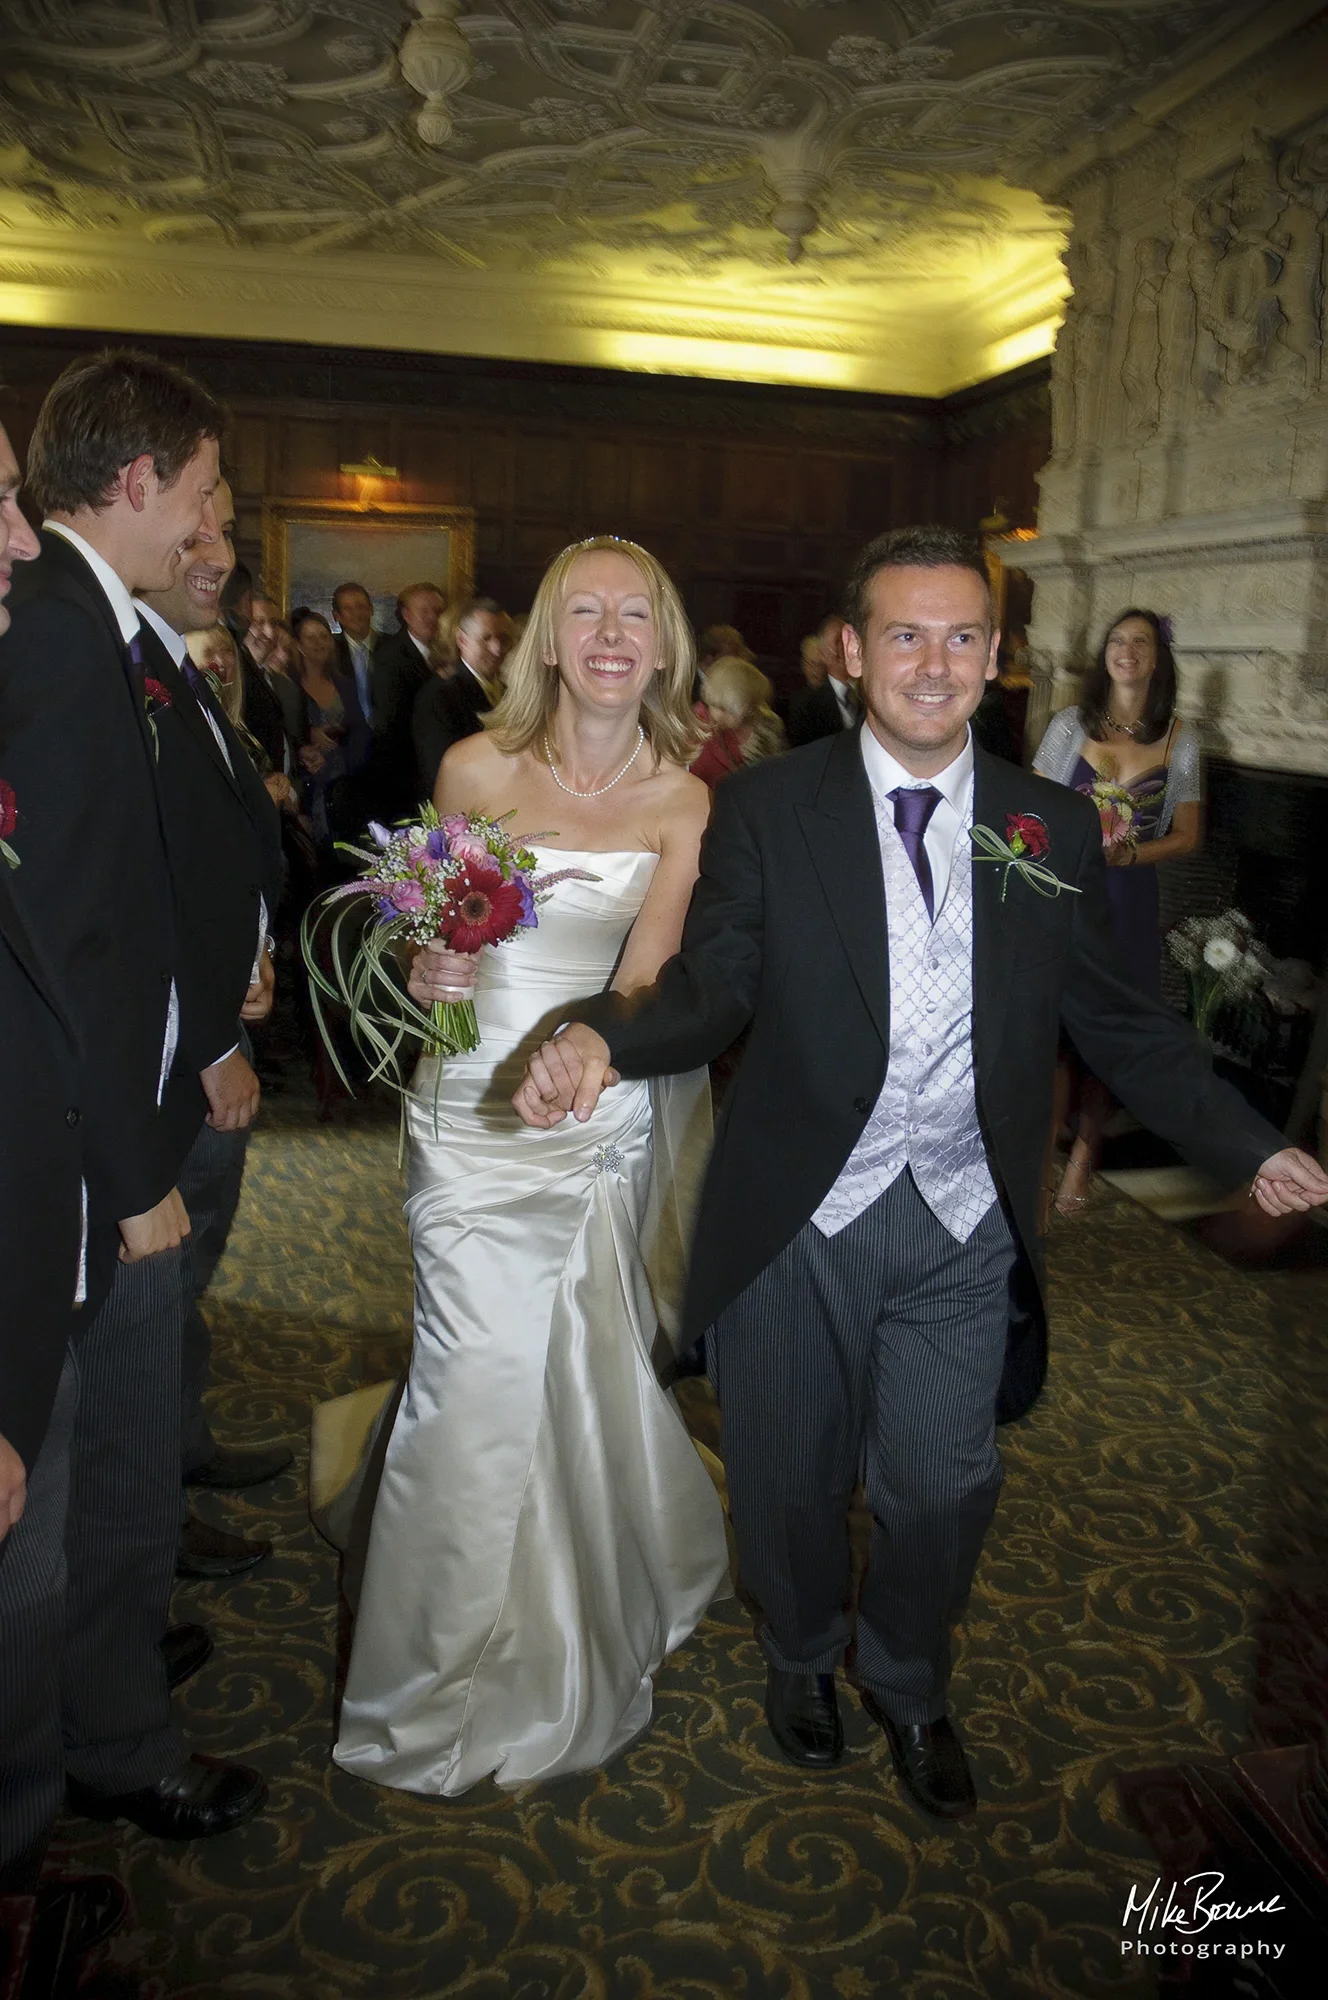 Newly weds walking down the aisle in an ornately panelled wedding venue with huge smiles on their faces